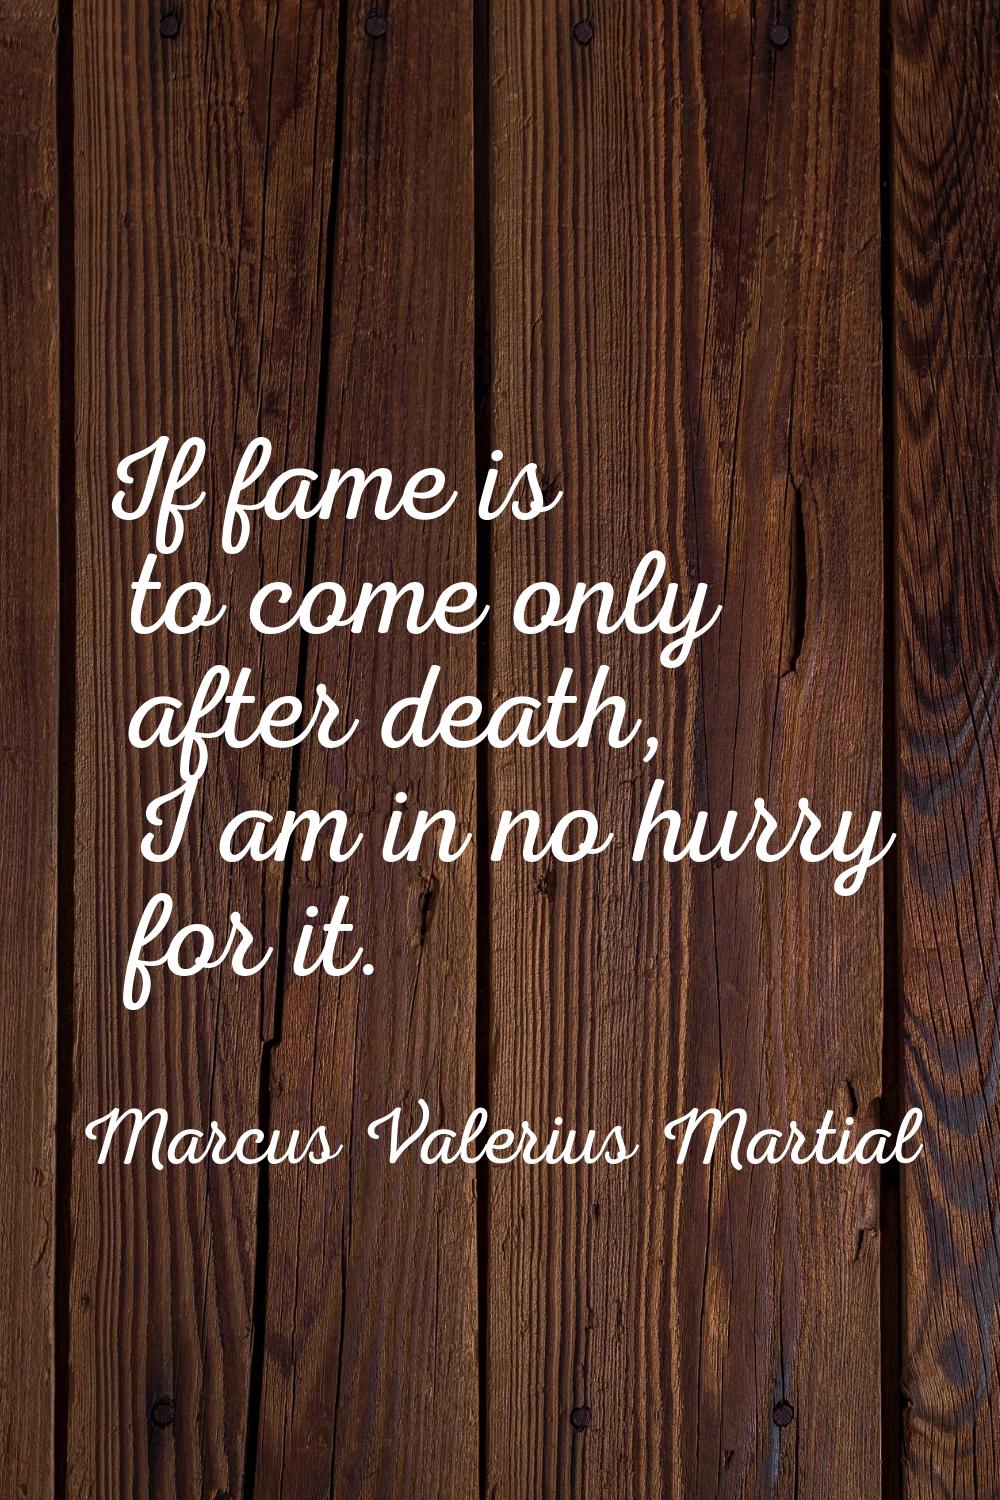 If fame is to come only after death, I am in no hurry for it.